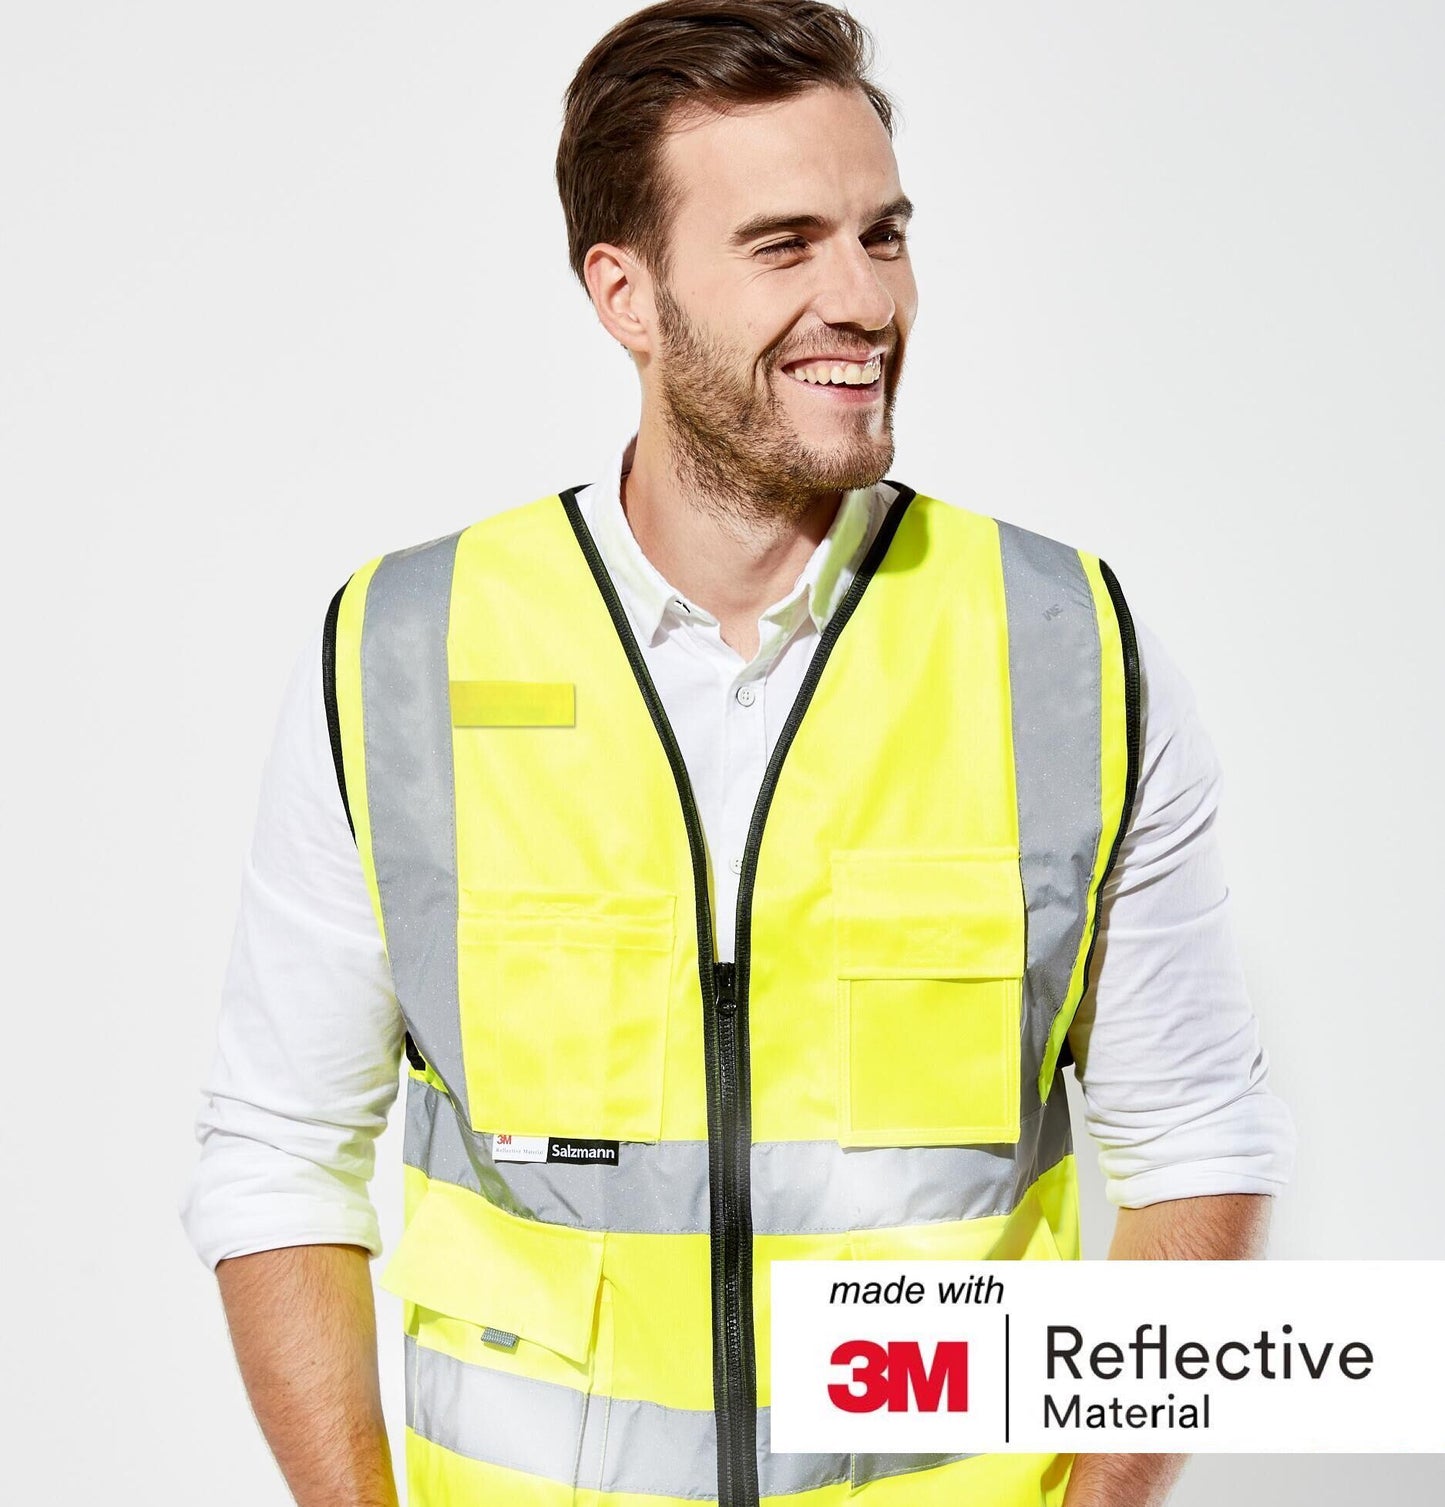 Close-up of man stood smiling wearing Yellow safety vest